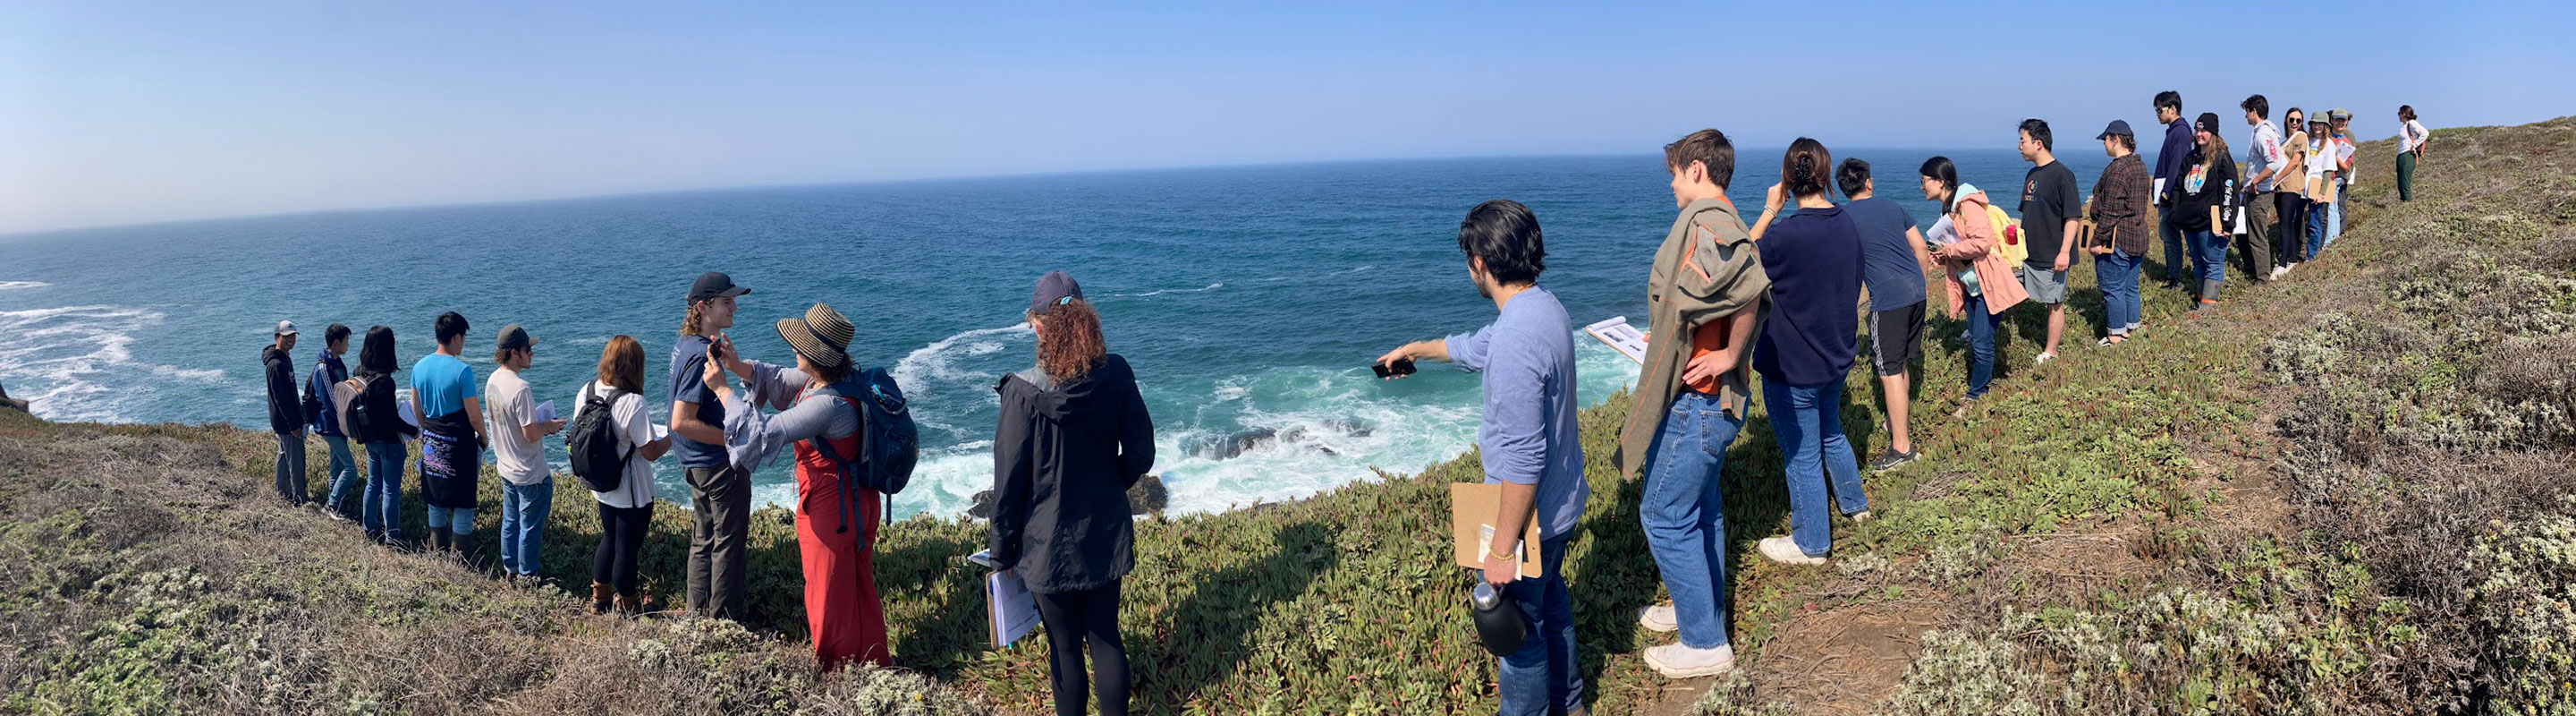 A group of people on a cliff looking down at the ocean